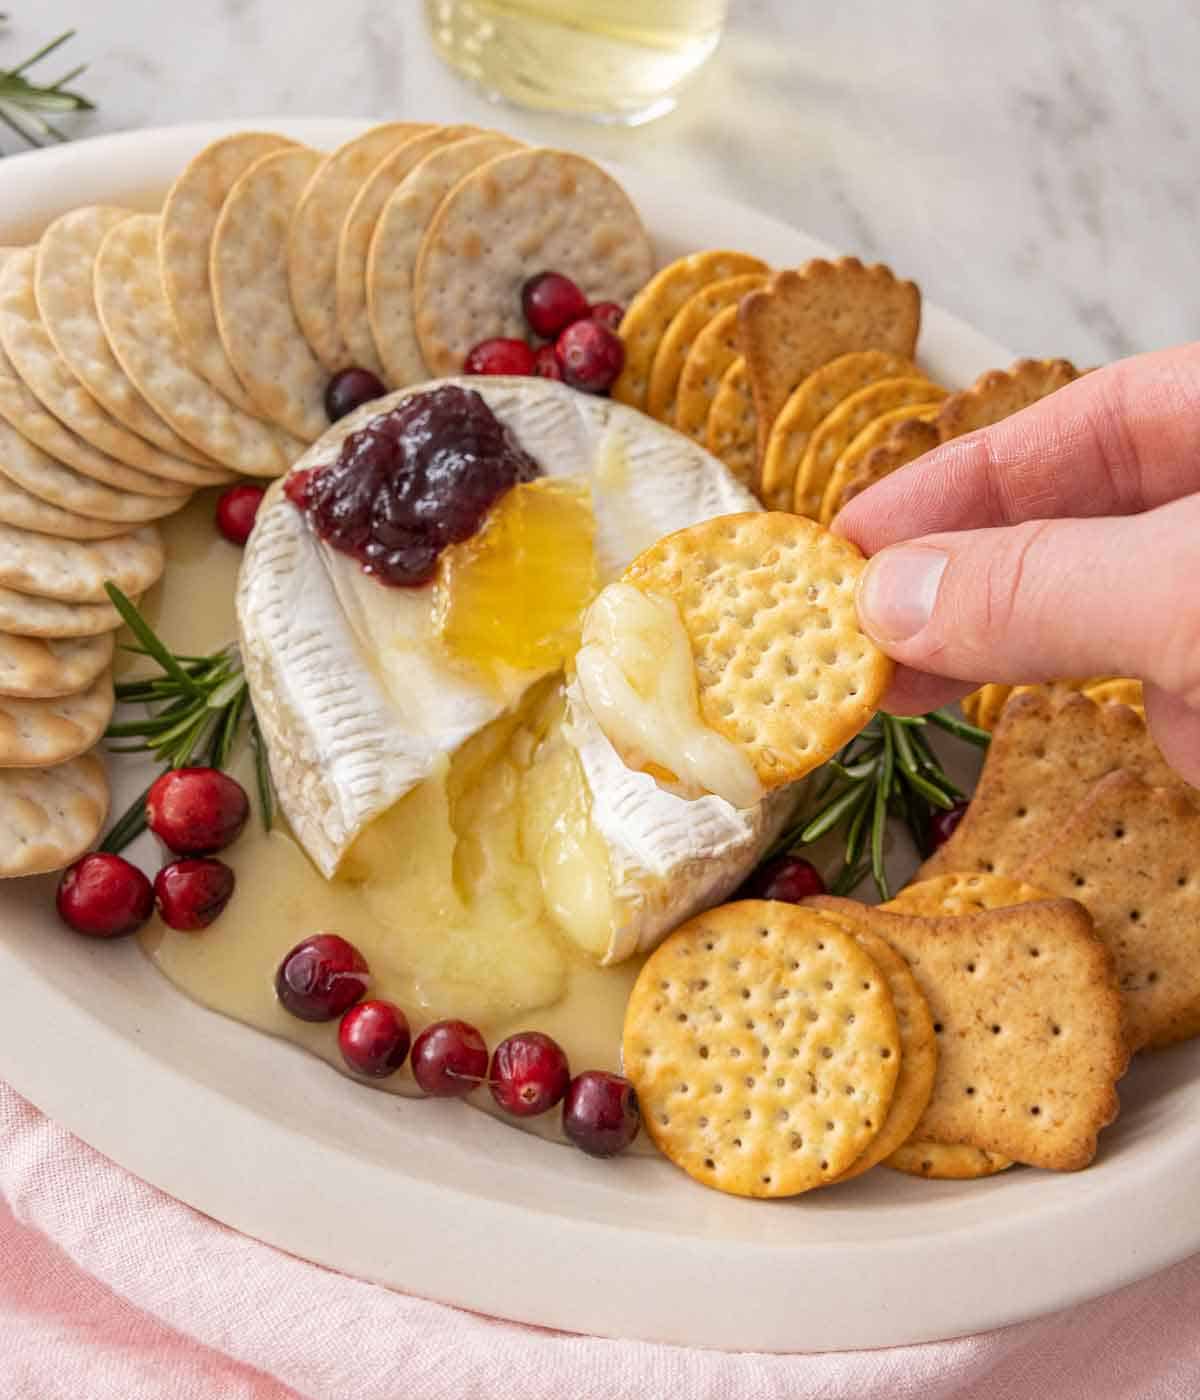 A cracker scooping out melty baked brie from the platter.